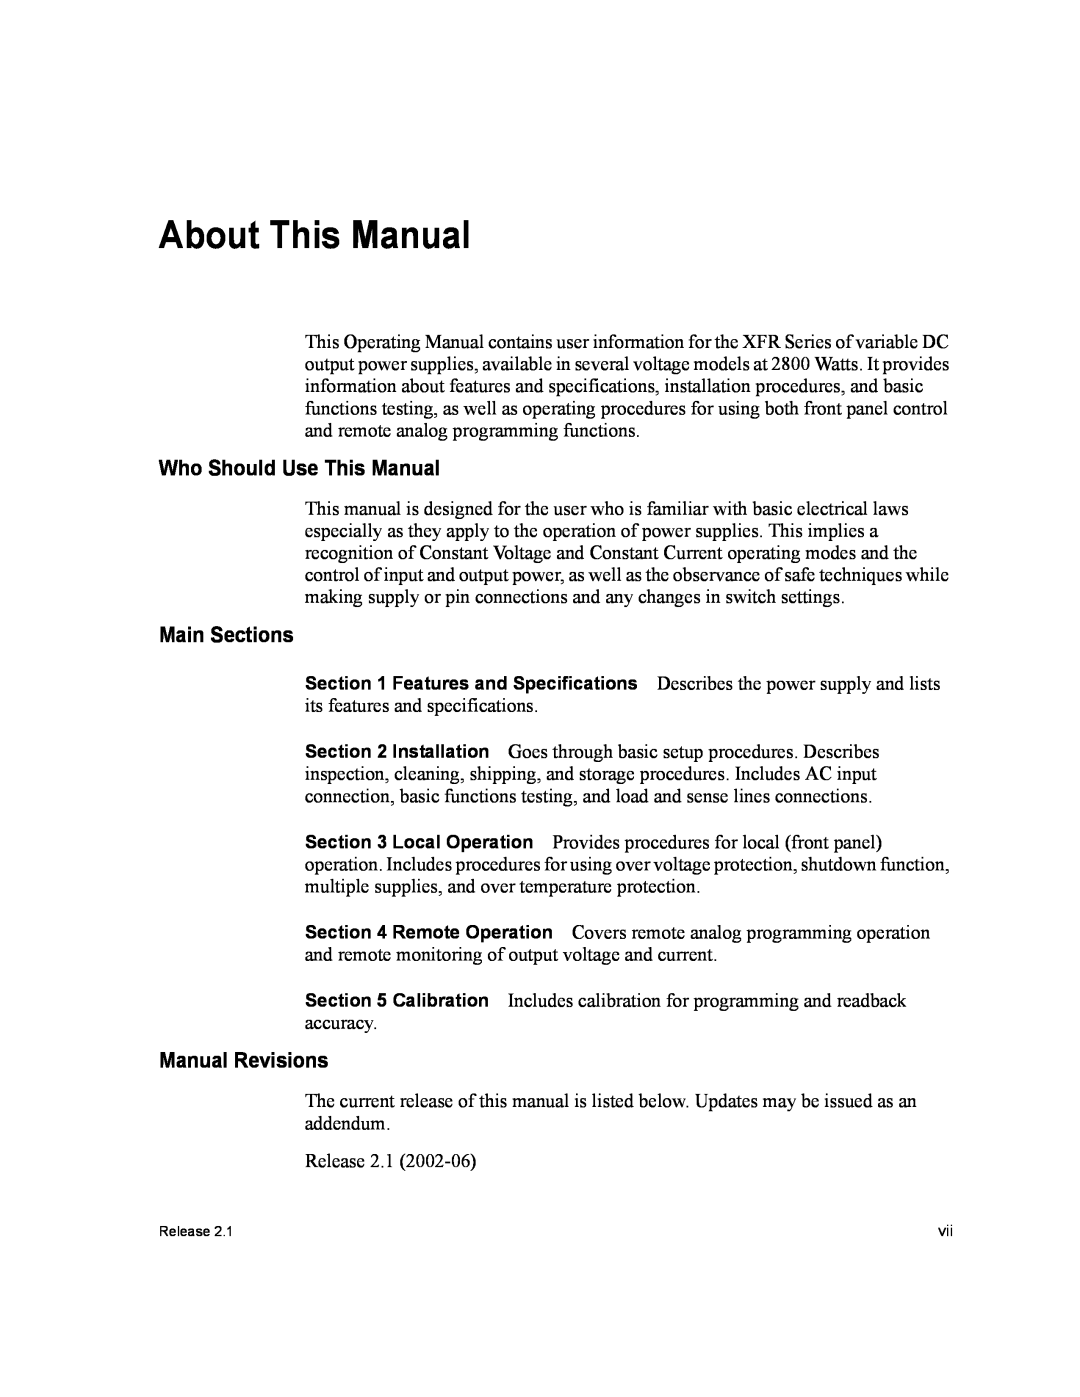 Xantrex Technology XFR 2800 manual Who Should Use This Manual, Main Sections, Manual Revisions, About This Manual 